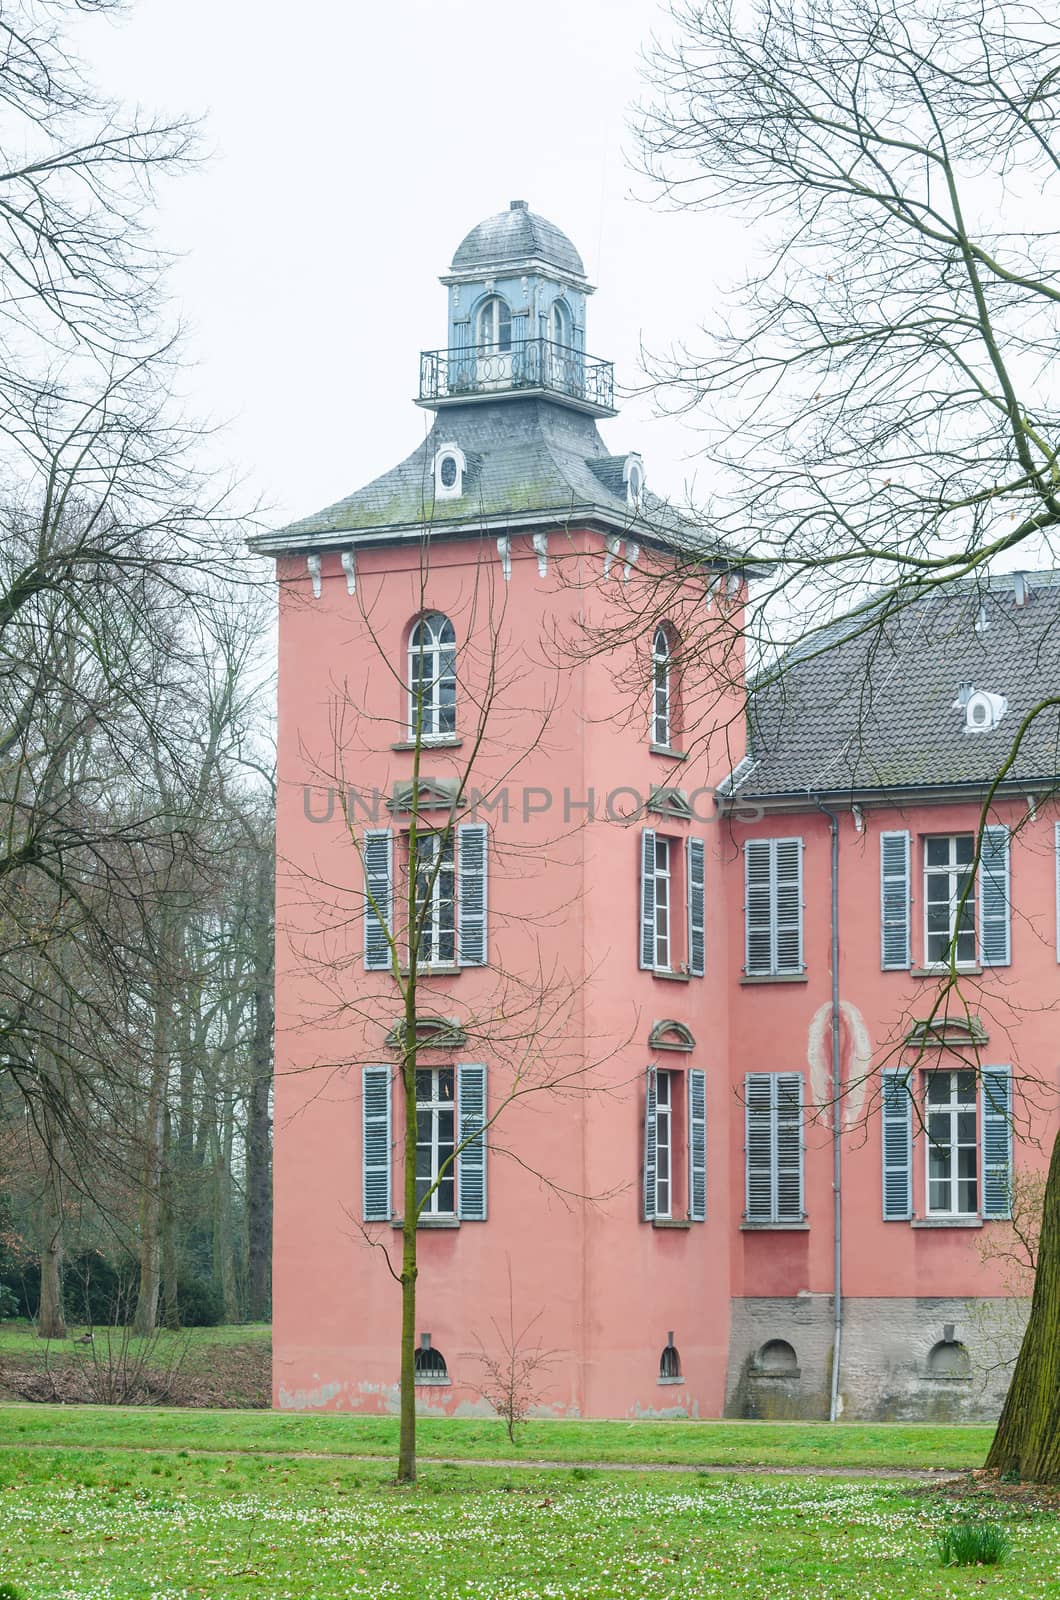  Tower of an old moated castle by JFsPic